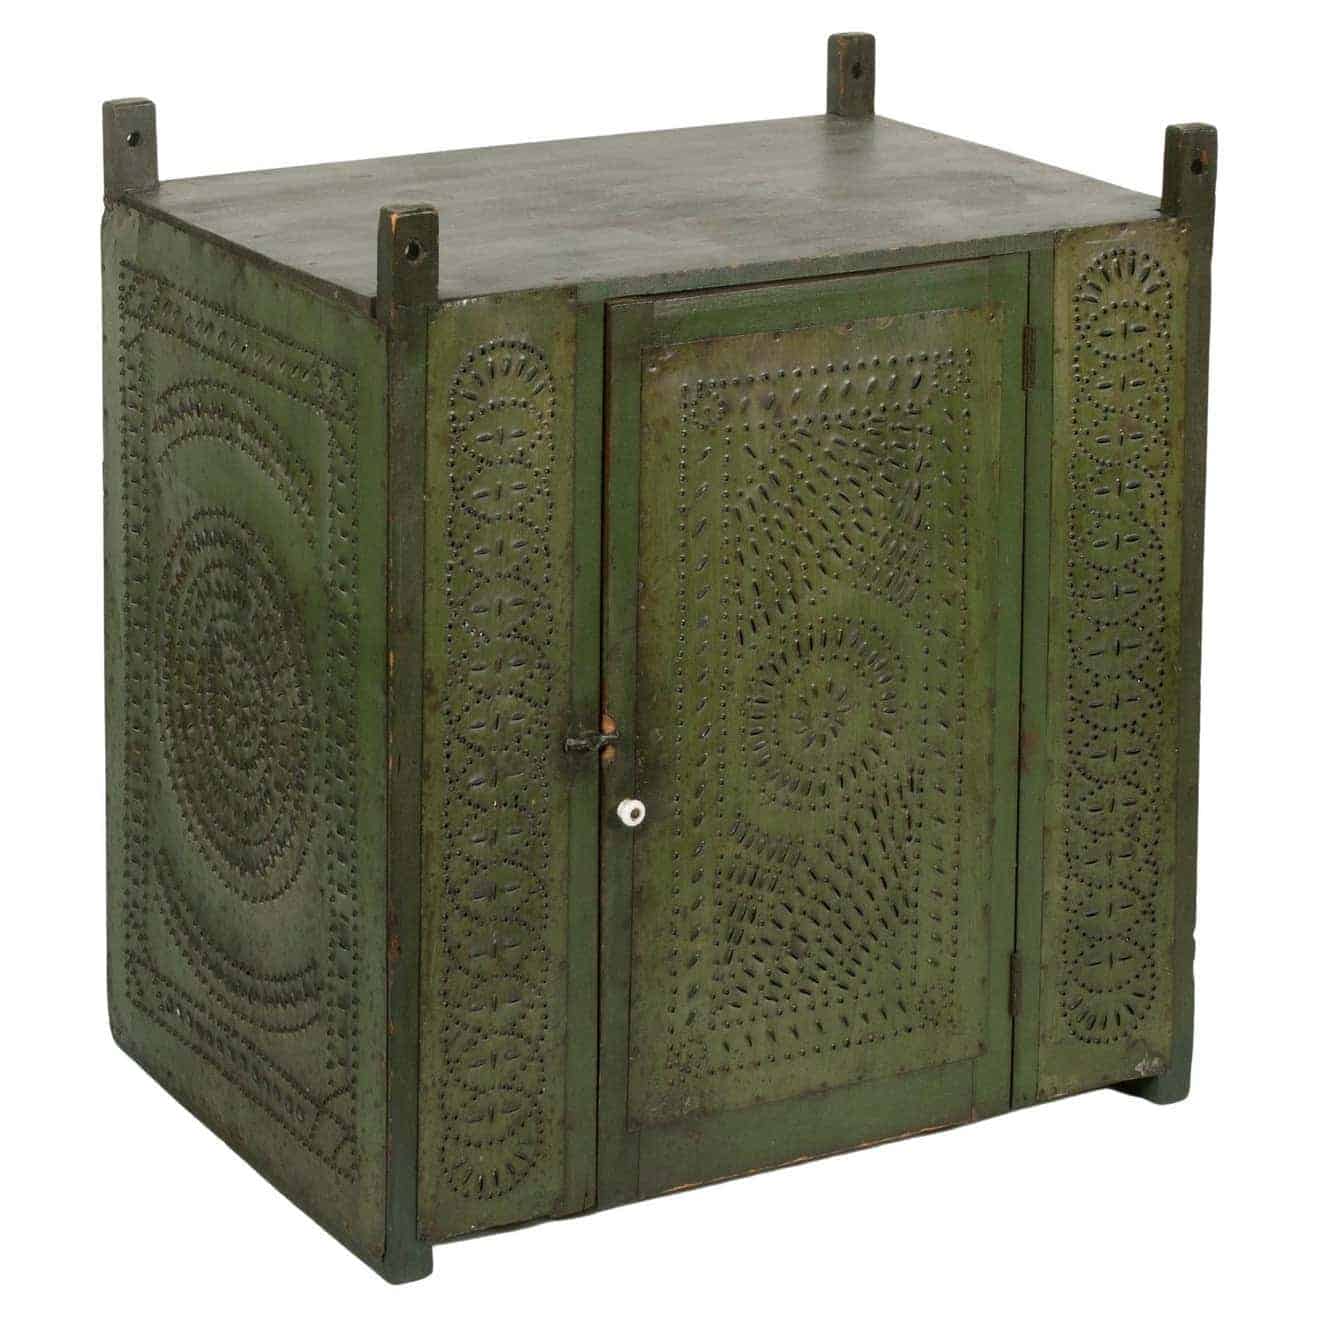 Green hanging pie safe from 1850 to 1880